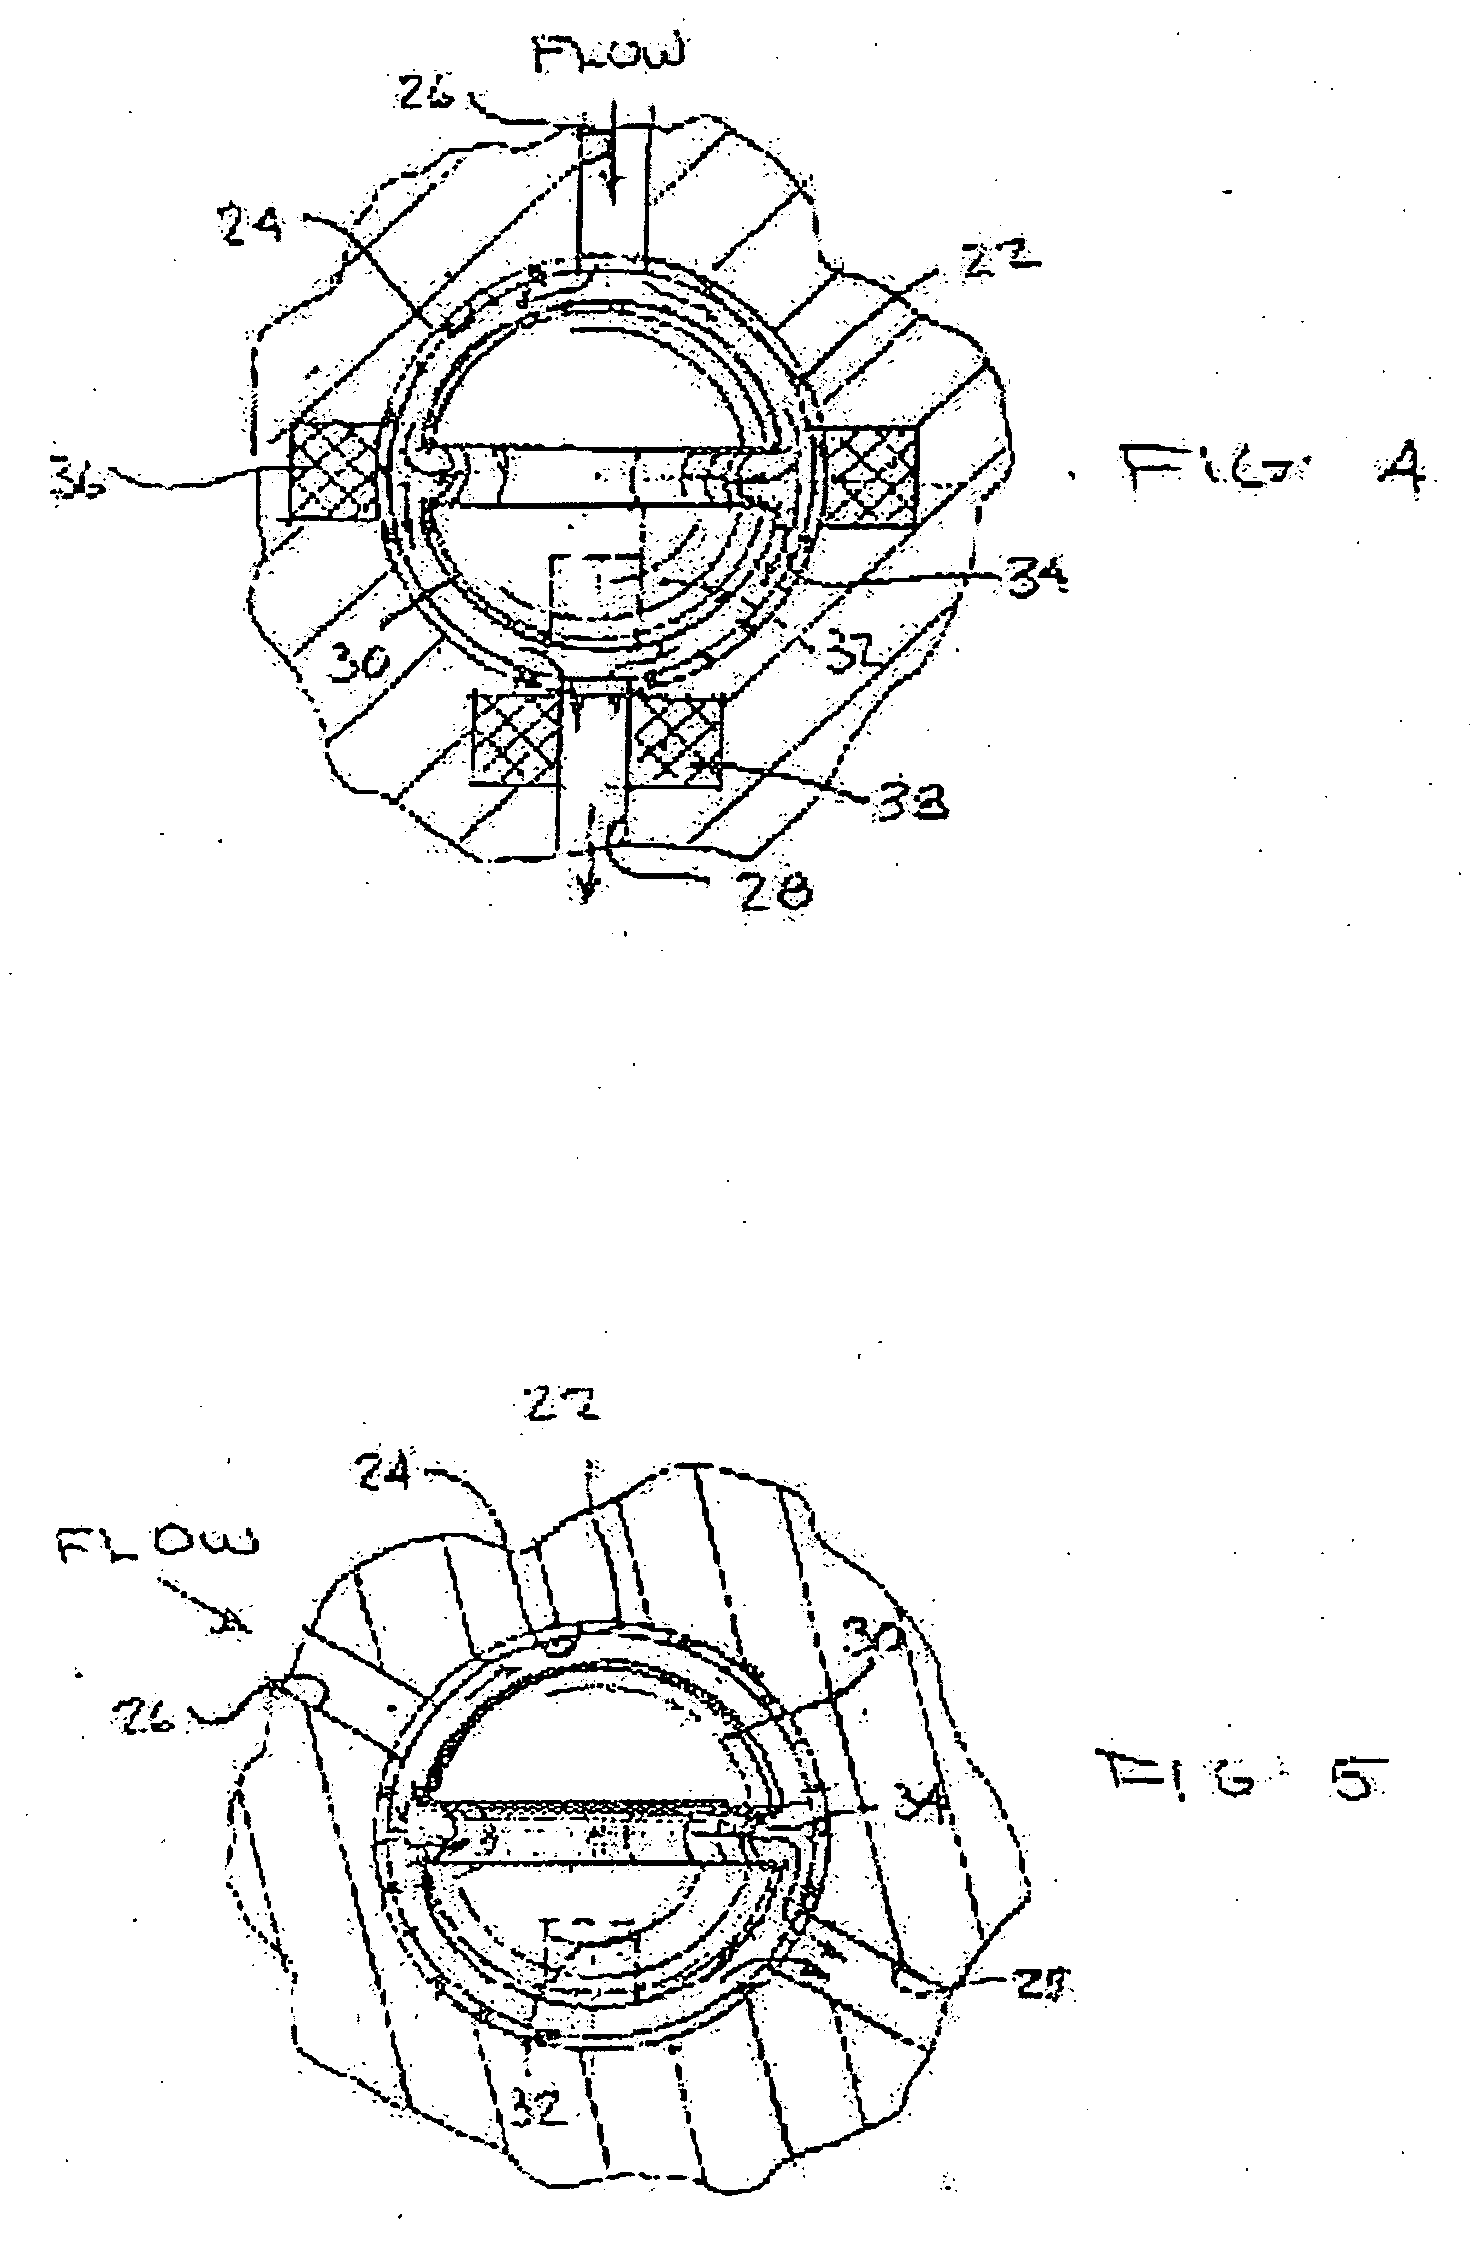 Shunt system including a flow control device for controlling the flow of cerebrospinal fluid out of a brain ventricle